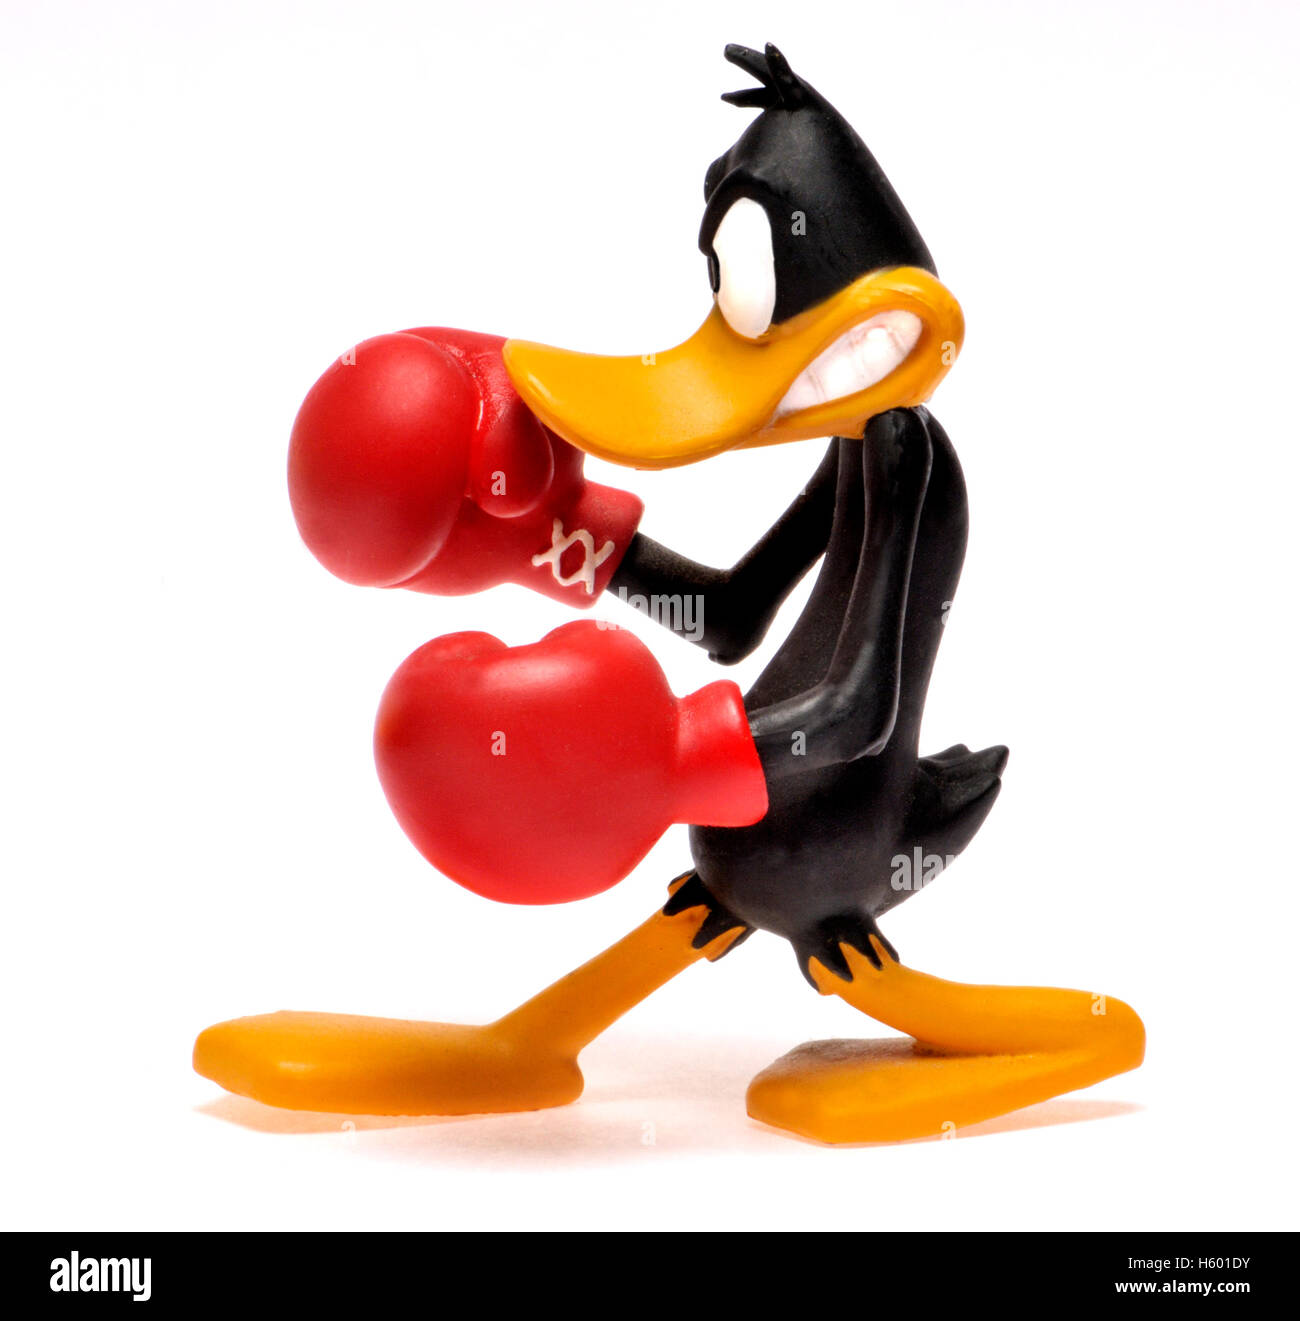 Personnage figurine - Daffy Duck boxing Banque D'Images